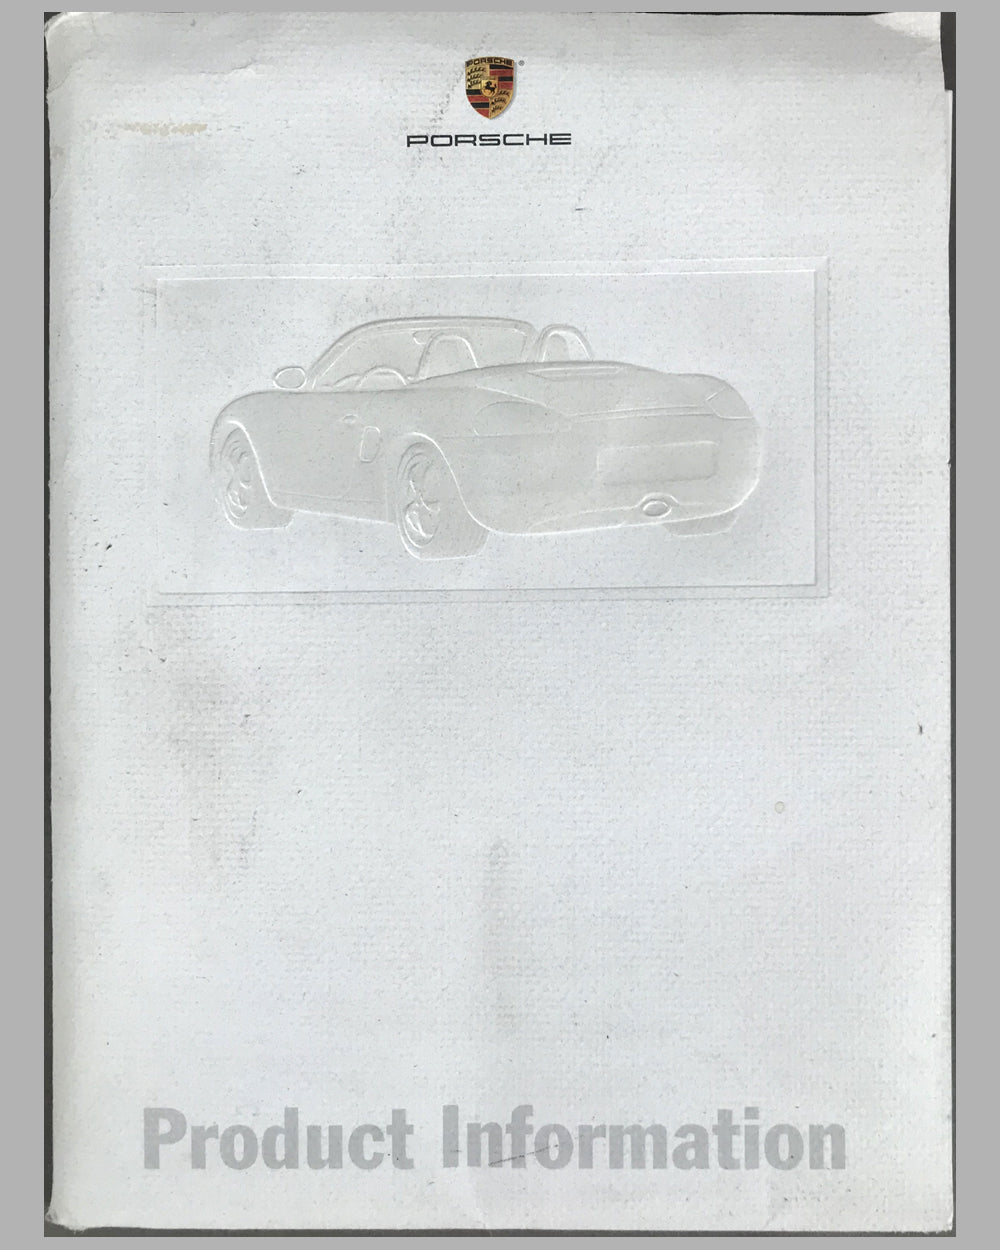 Porsche Boxter press release for the U.S. market on January 3rd 1997